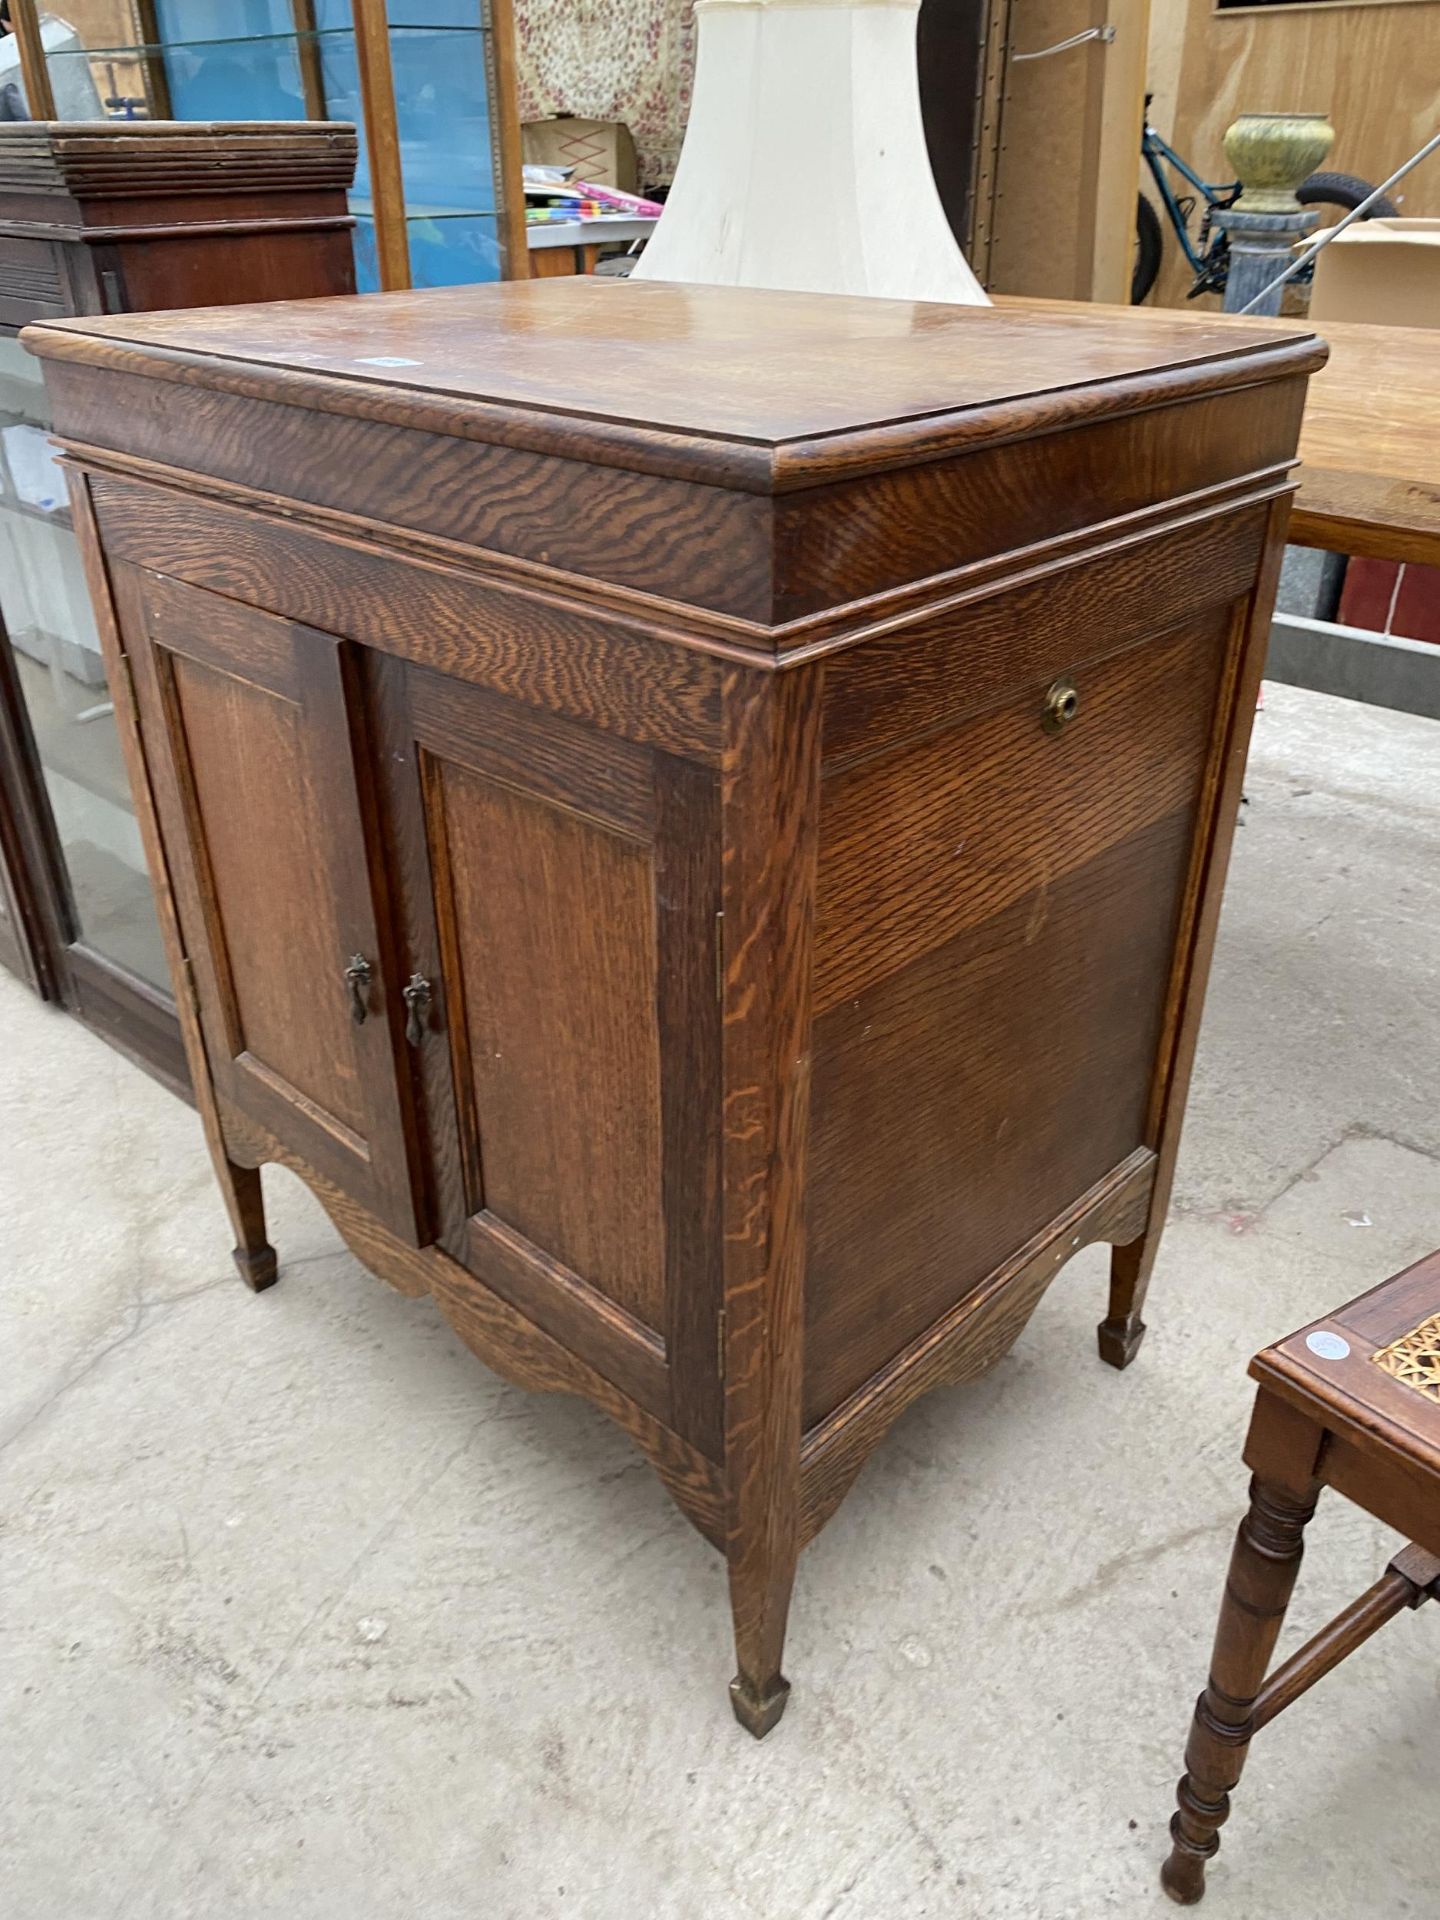 AN EARLY 20TH CENTURY OAK GRAMOPHONE CABINET LACKING WINDER AND WORKS - Image 2 of 5